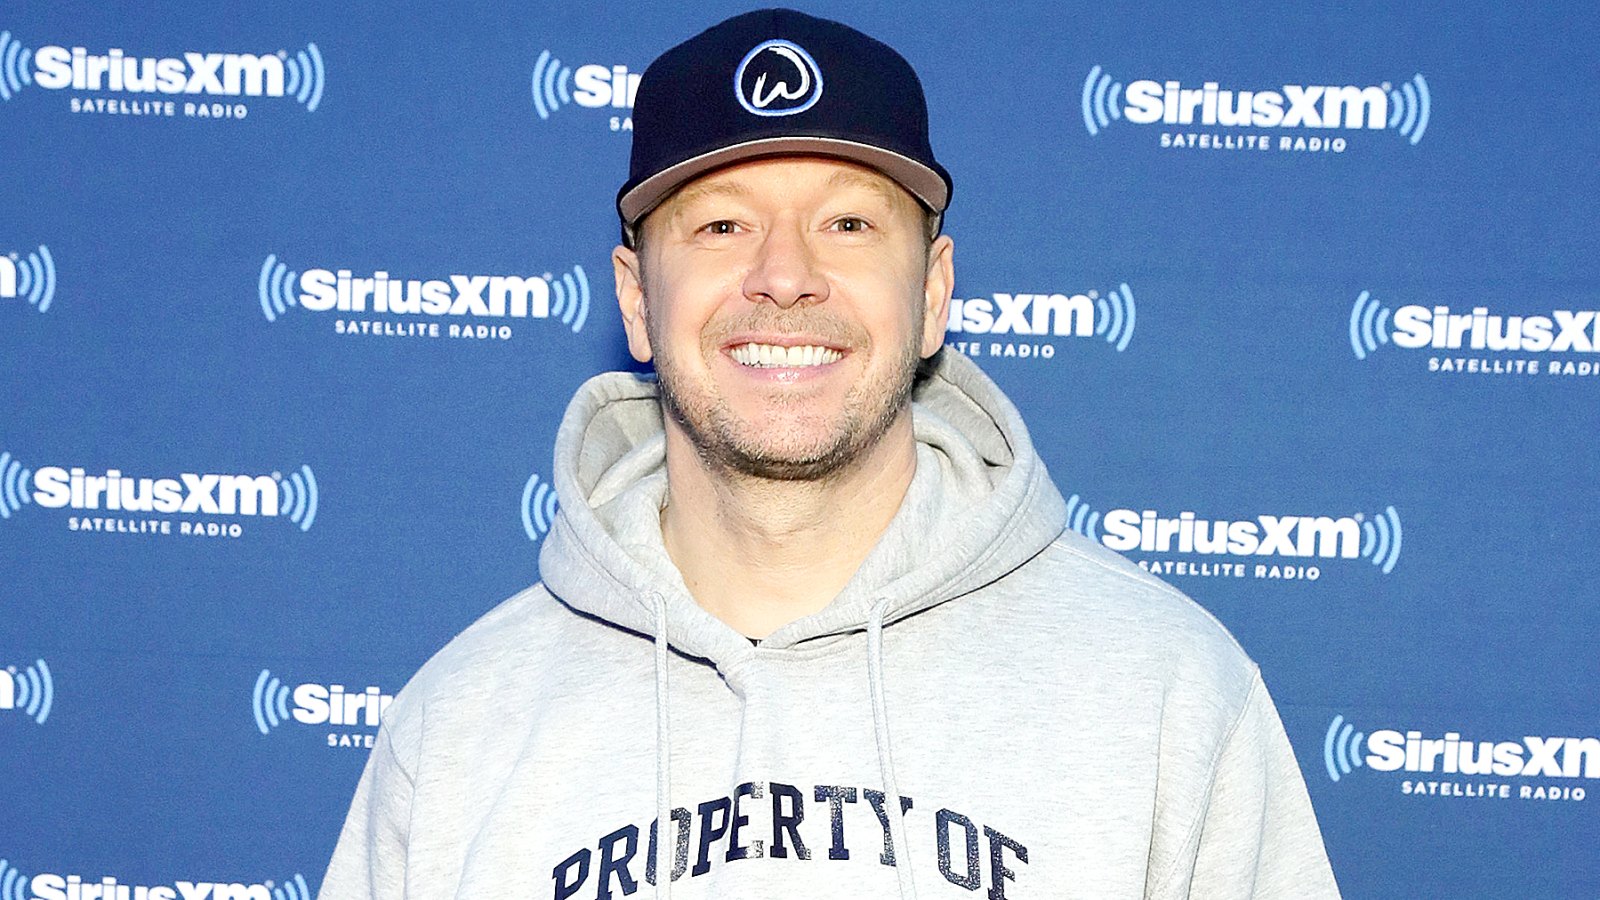 Donnie Wahlberg visits the SiriusXM set at Super Bowl LI Radio Row at the George R. Brown Convention Center on February 3, 2017 in Houston, Texas.